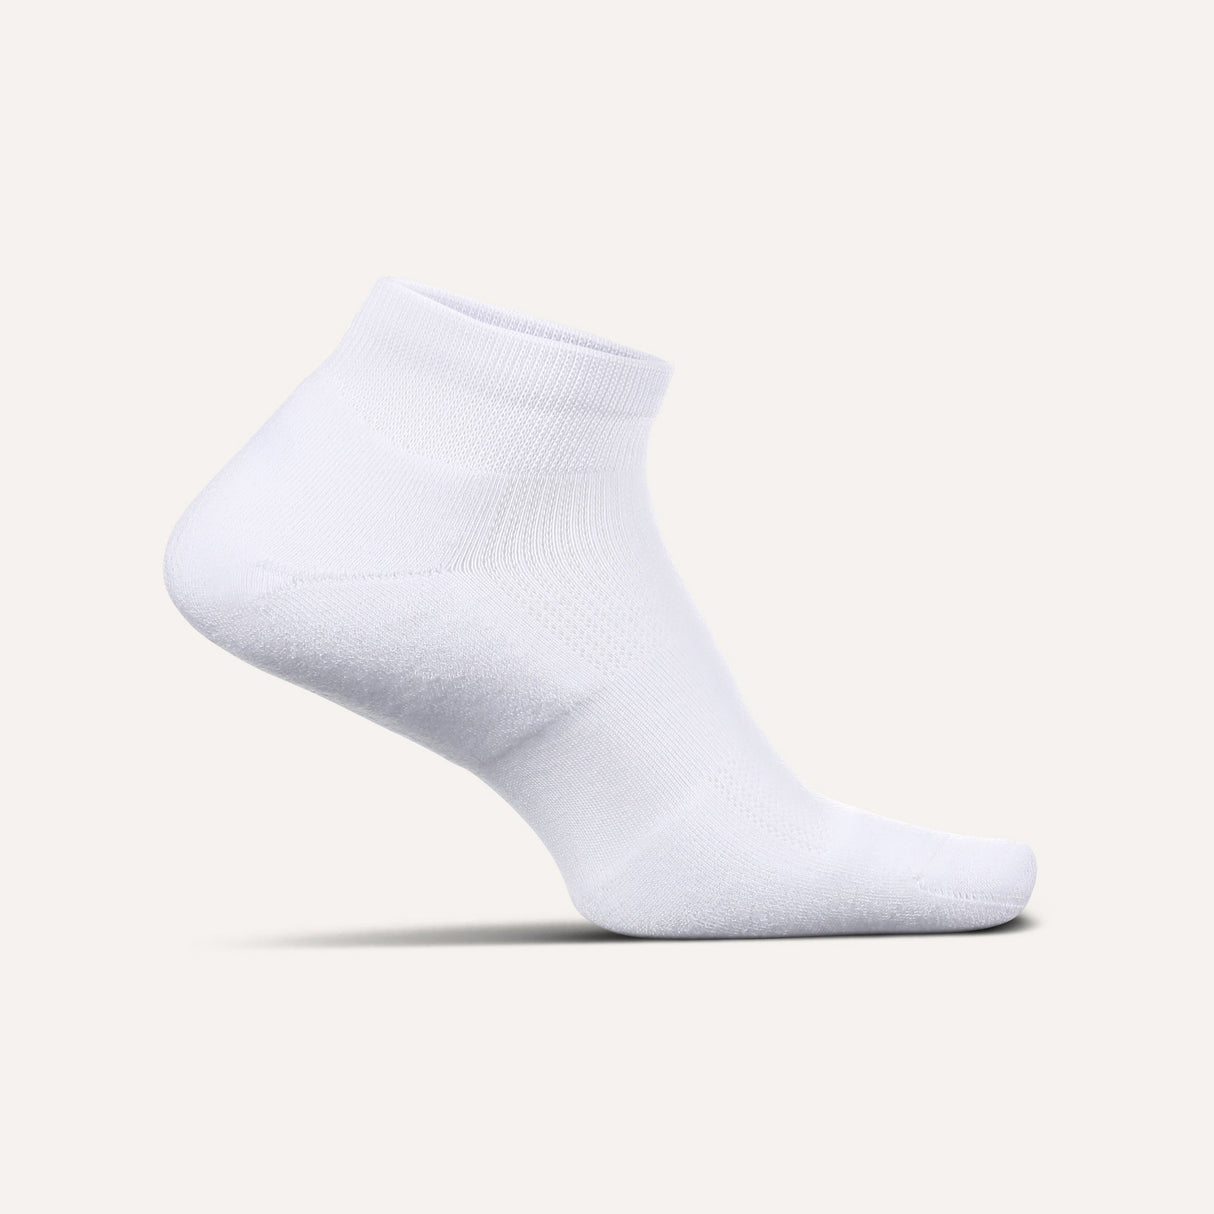 Feetures Therapeutic Max Cushion Low Cut Socks  -  Small / White